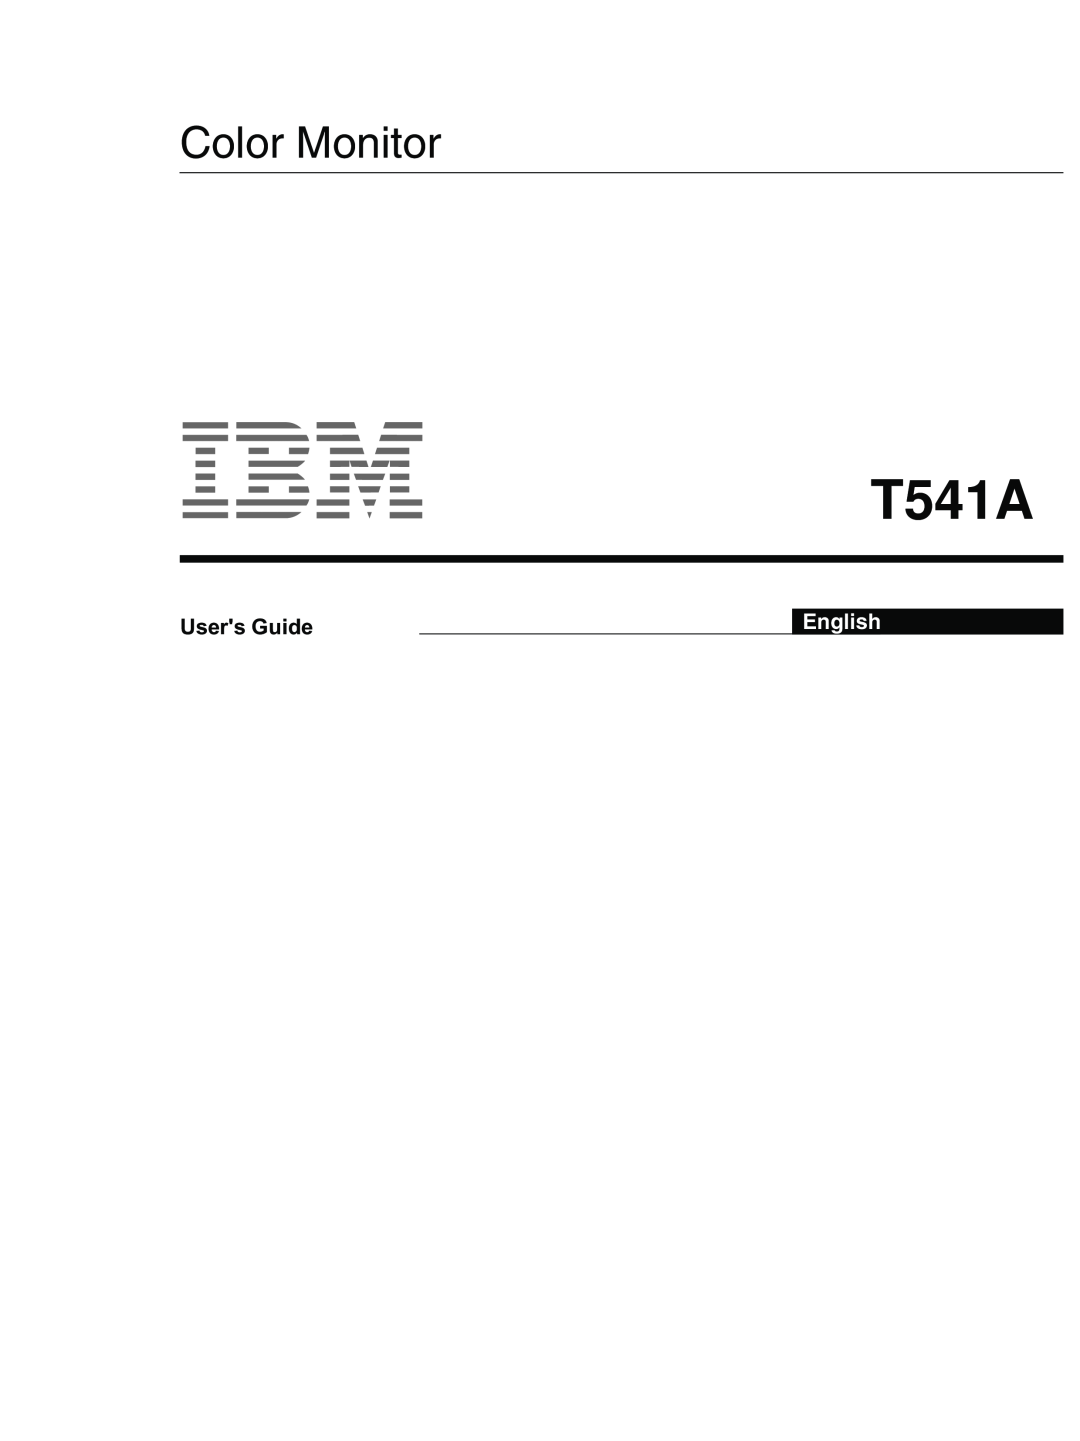 IBM T541A manual Users Guide, Color Monitor, English 